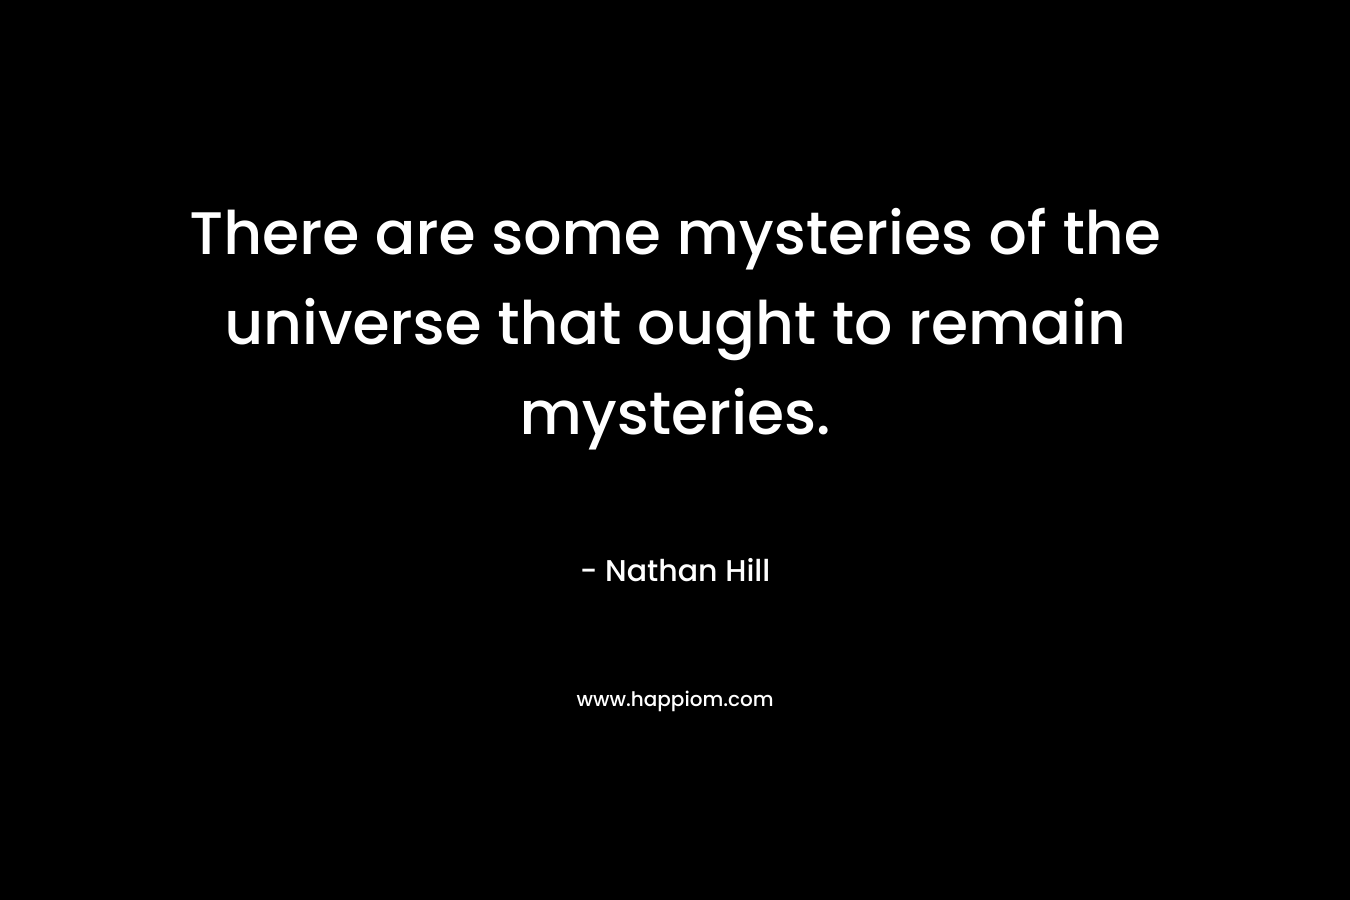 There are some mysteries of the universe that ought to remain mysteries.